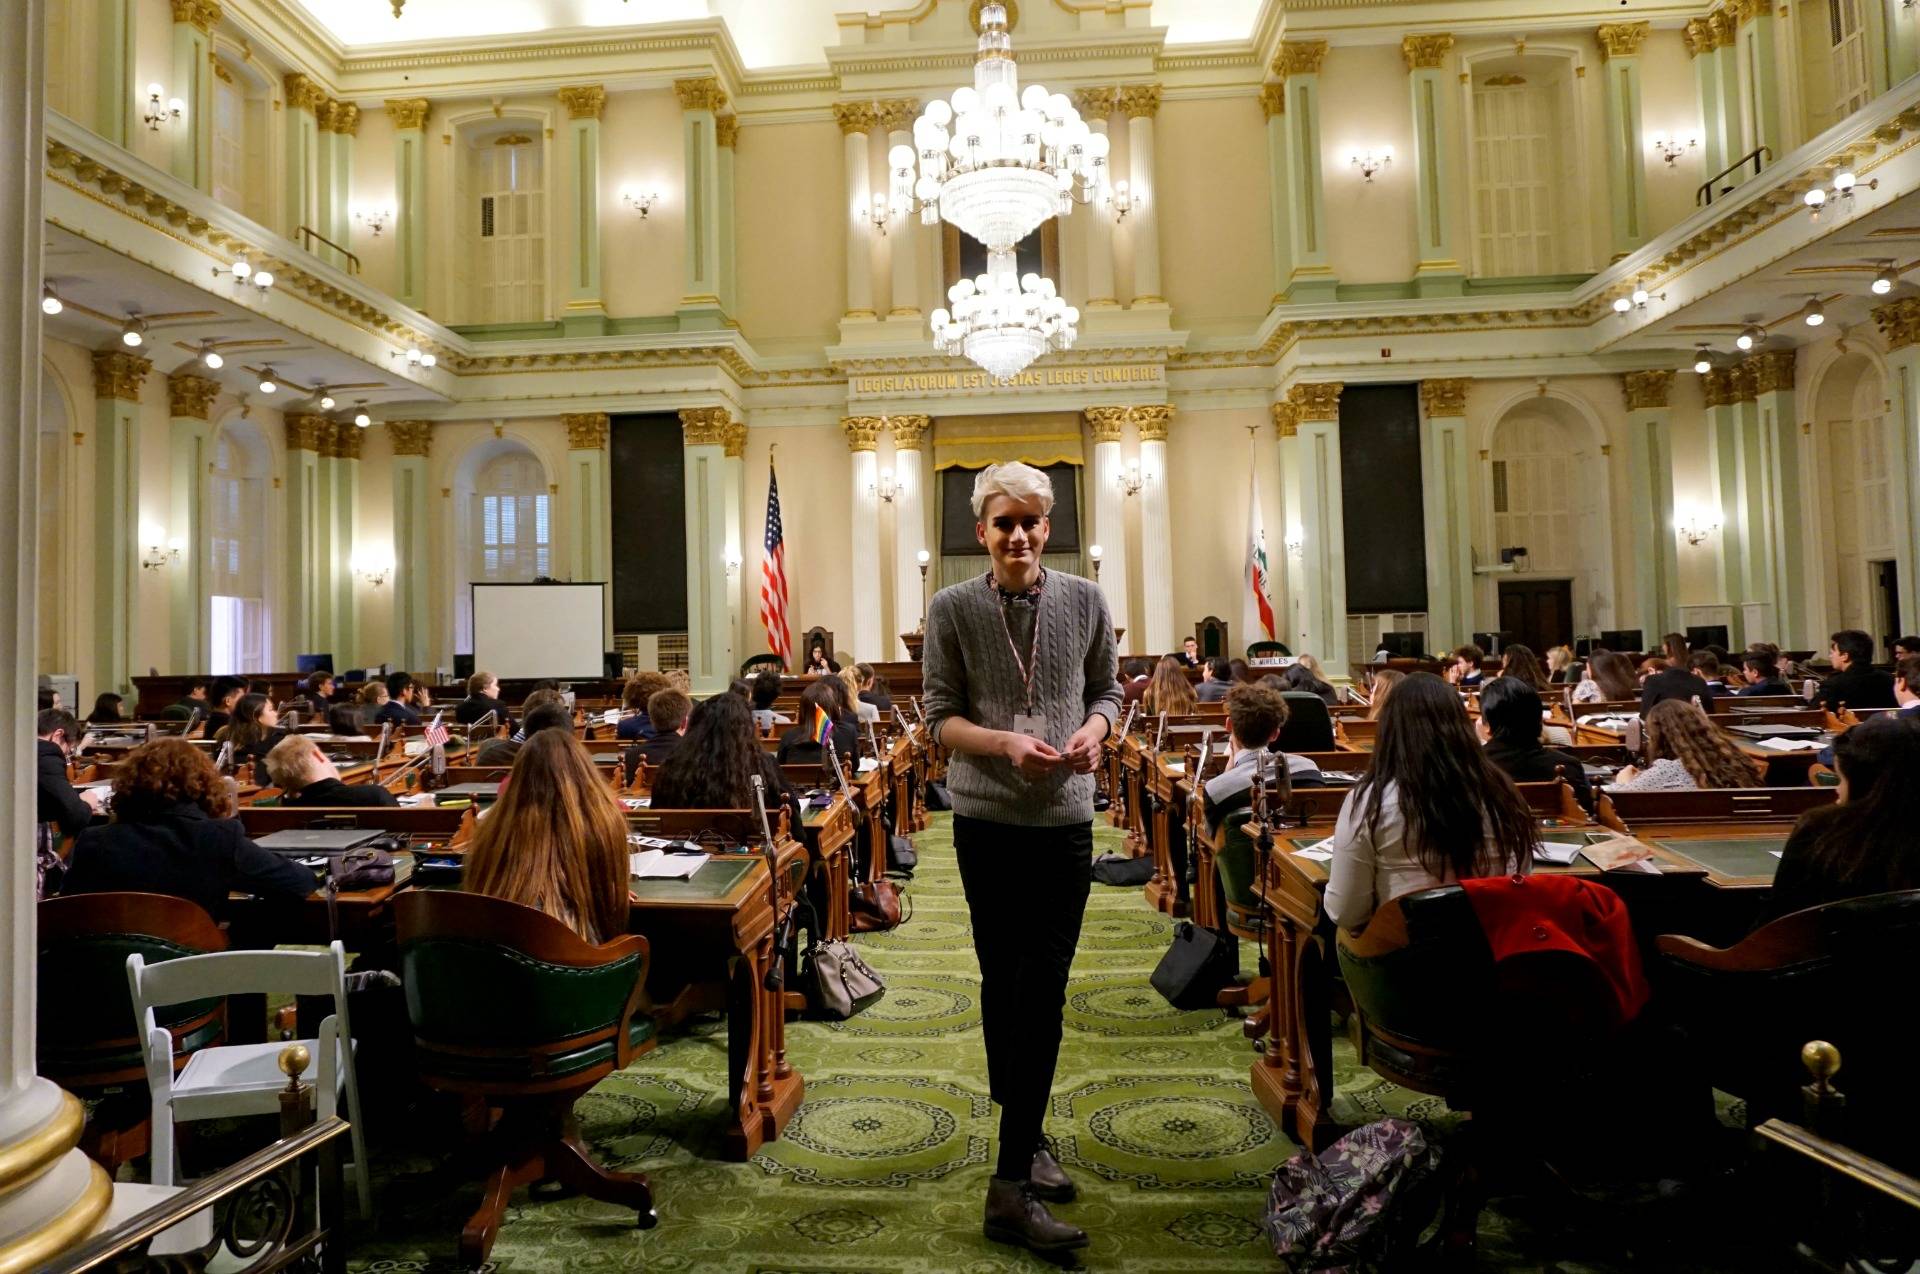 A page passes notes between members of the Assembly. Amanda Font/KQED